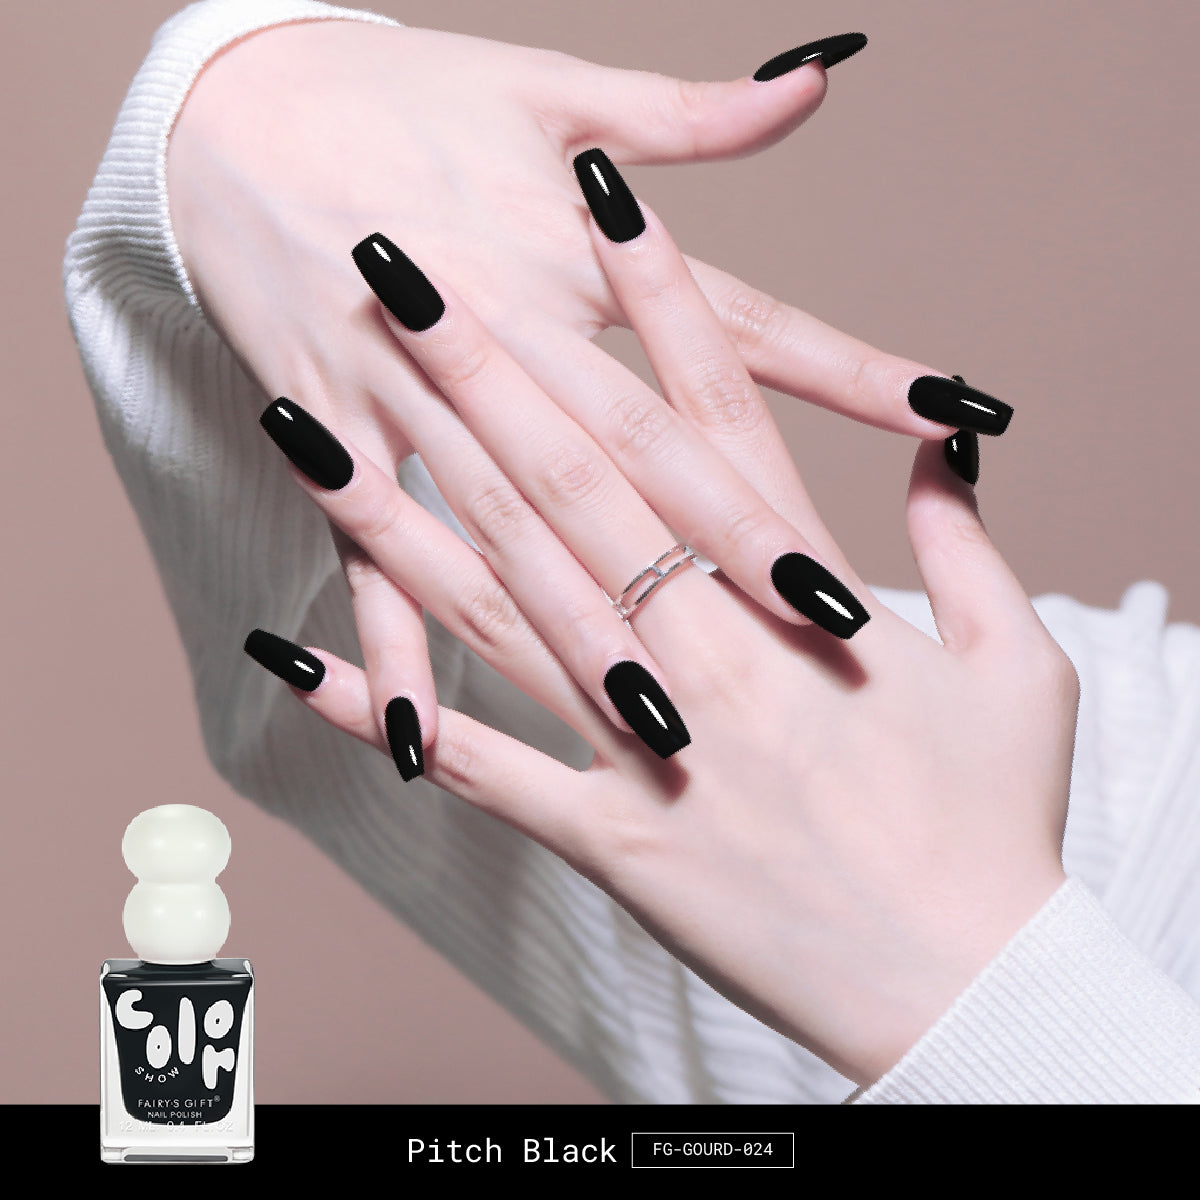 Fairy's Gift Lil's gourdie series quick dry nail polish in Pitch Black colour 024